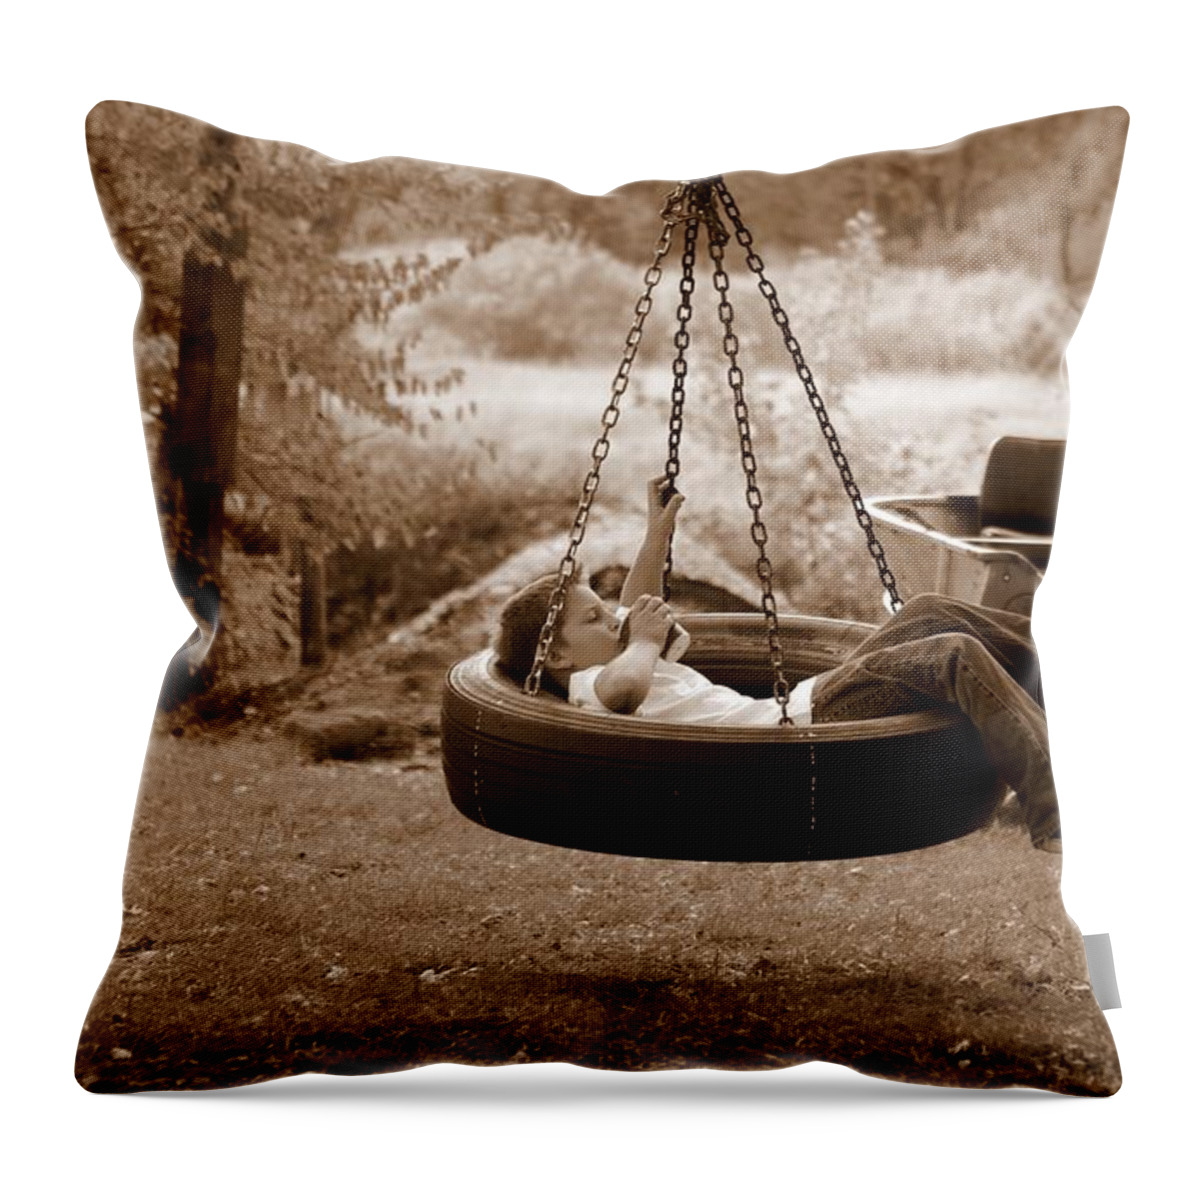 Swinging Throw Pillow featuring the photograph Lazy Days by Linda Mishler